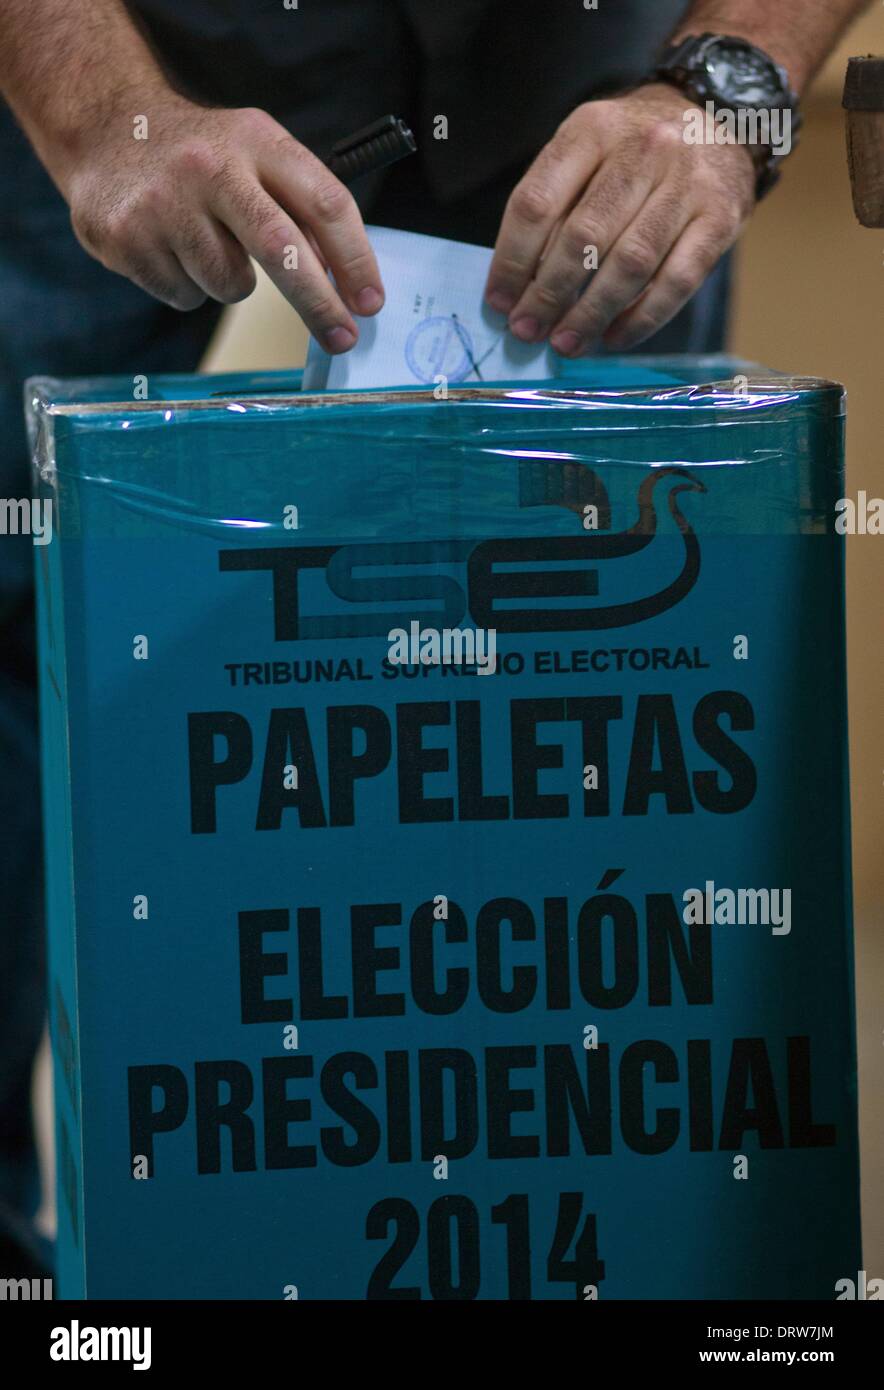 San Salvador, Feb. 2. 1st June, 2014. A citizen casts his ballot during the presidential elections at the Conventions Center, in San Salvador, capital of El Salvador, on Feb. 2, 2014. Salvadorans are going to the polls on Sunday to elect a president and vice president for the next five-year term beginning June 1, 2014. © David de la Paz/Xinhua/Alamy Live News Stock Photo